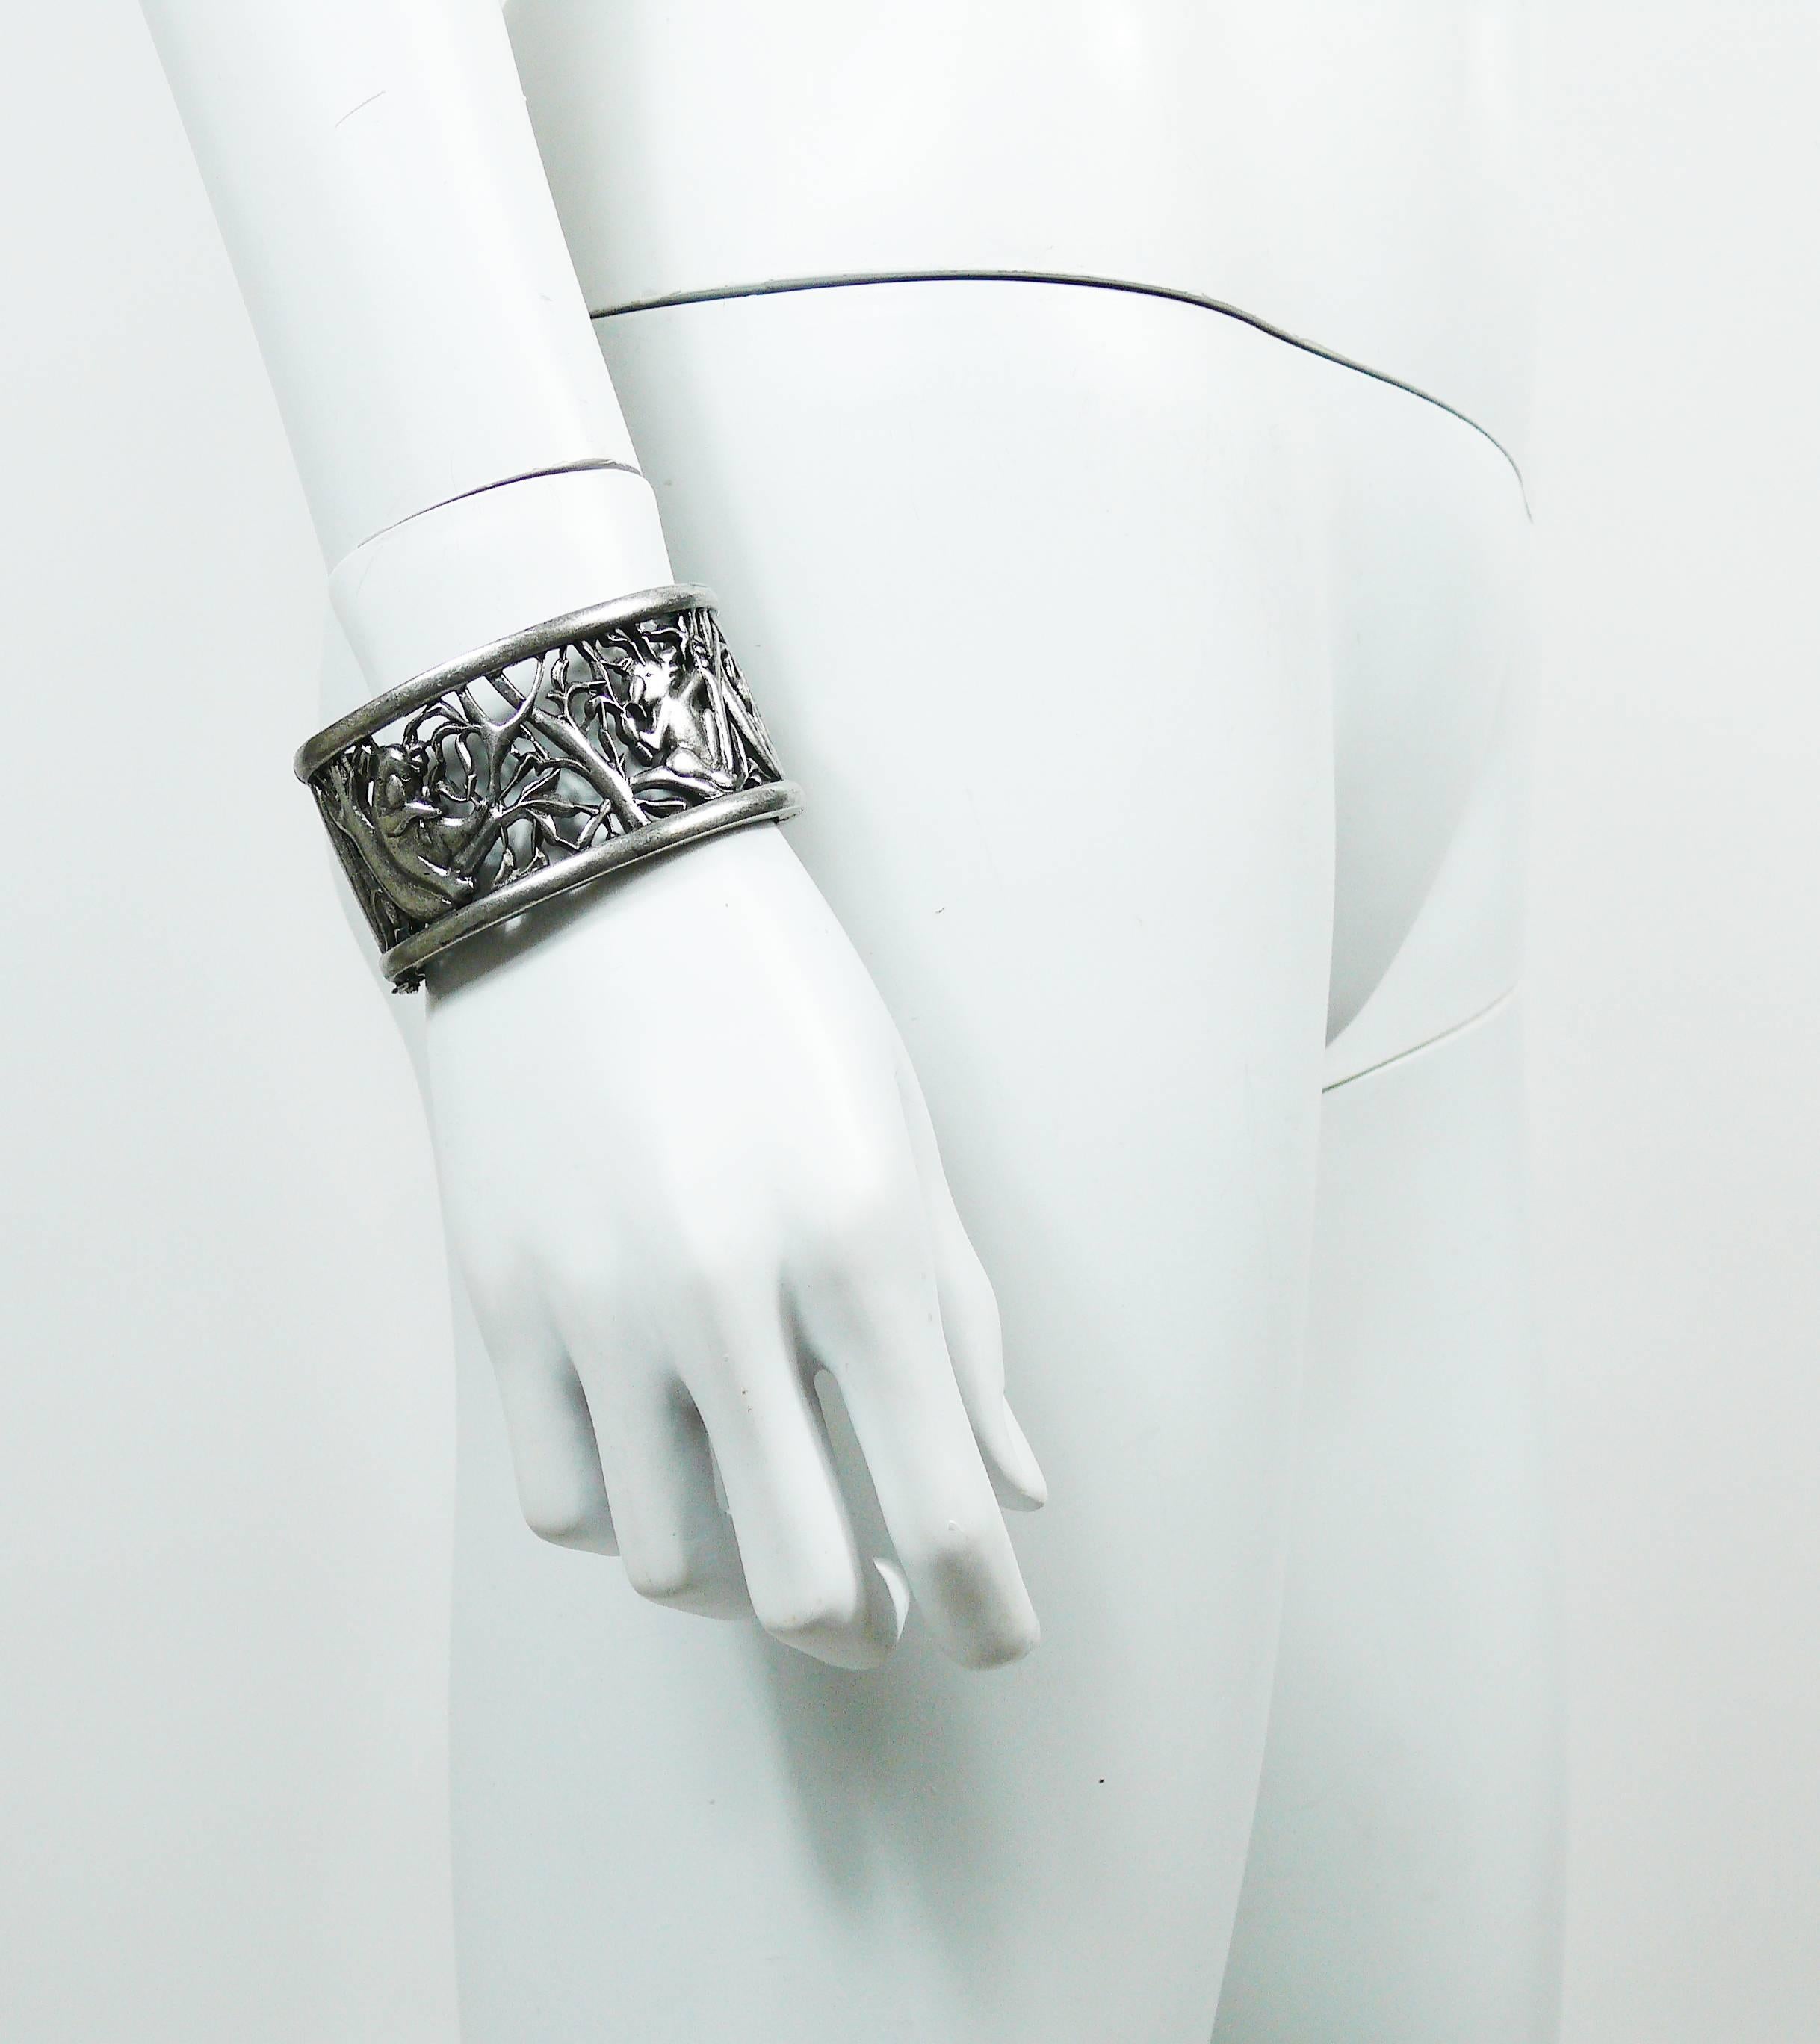 CHLOE antiqued silver toned cuff bracelet featuring a gorgeous openwork design with trees and koalas.

Marked CHLOE on the cuff.

Secure clasp closure.

Indicative measurements : inner max. measurements approx. 6 cm x 5.1 cm (2.36 inches x 2.00